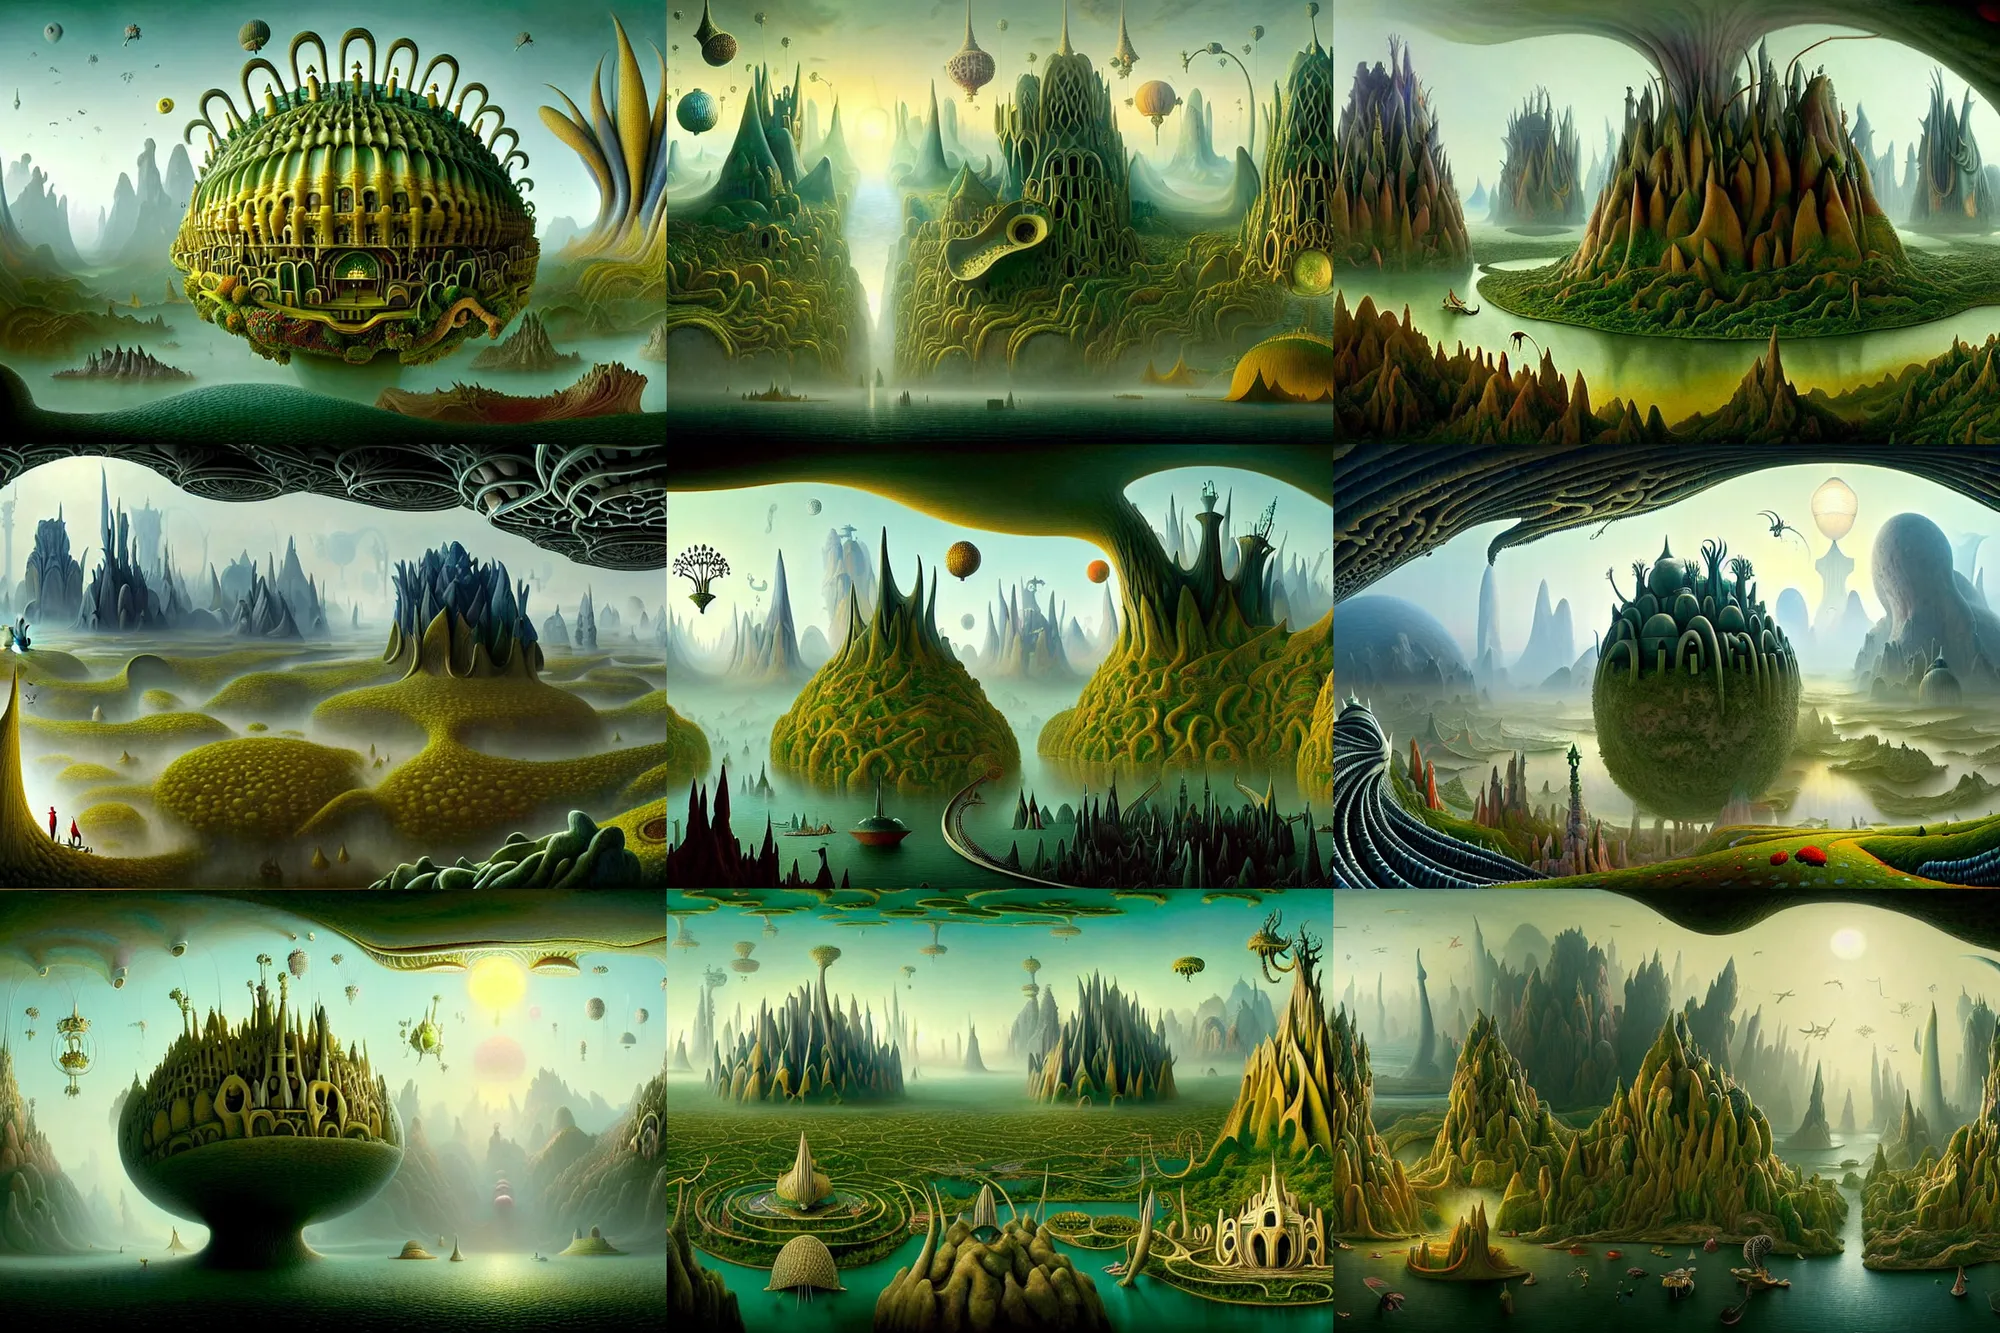 Prompt: a beguiling and insanely detailed matte painting of alien dream worlds with surreal architecture designed by Heironymous Bosch, mega structures inspired by Heironymous Bosch's Garden of Earthly Delights, vast surreal landscape and horizon by Asher Durand and Tyler Edlin, masterpiece!!, grand!, imaginative!!!, whimsical!!, epic scale, intricate details, sense of awe, elite, wonder, insanely complex, masterful composition, sharp focus, fantasy realism, dramatic lighting